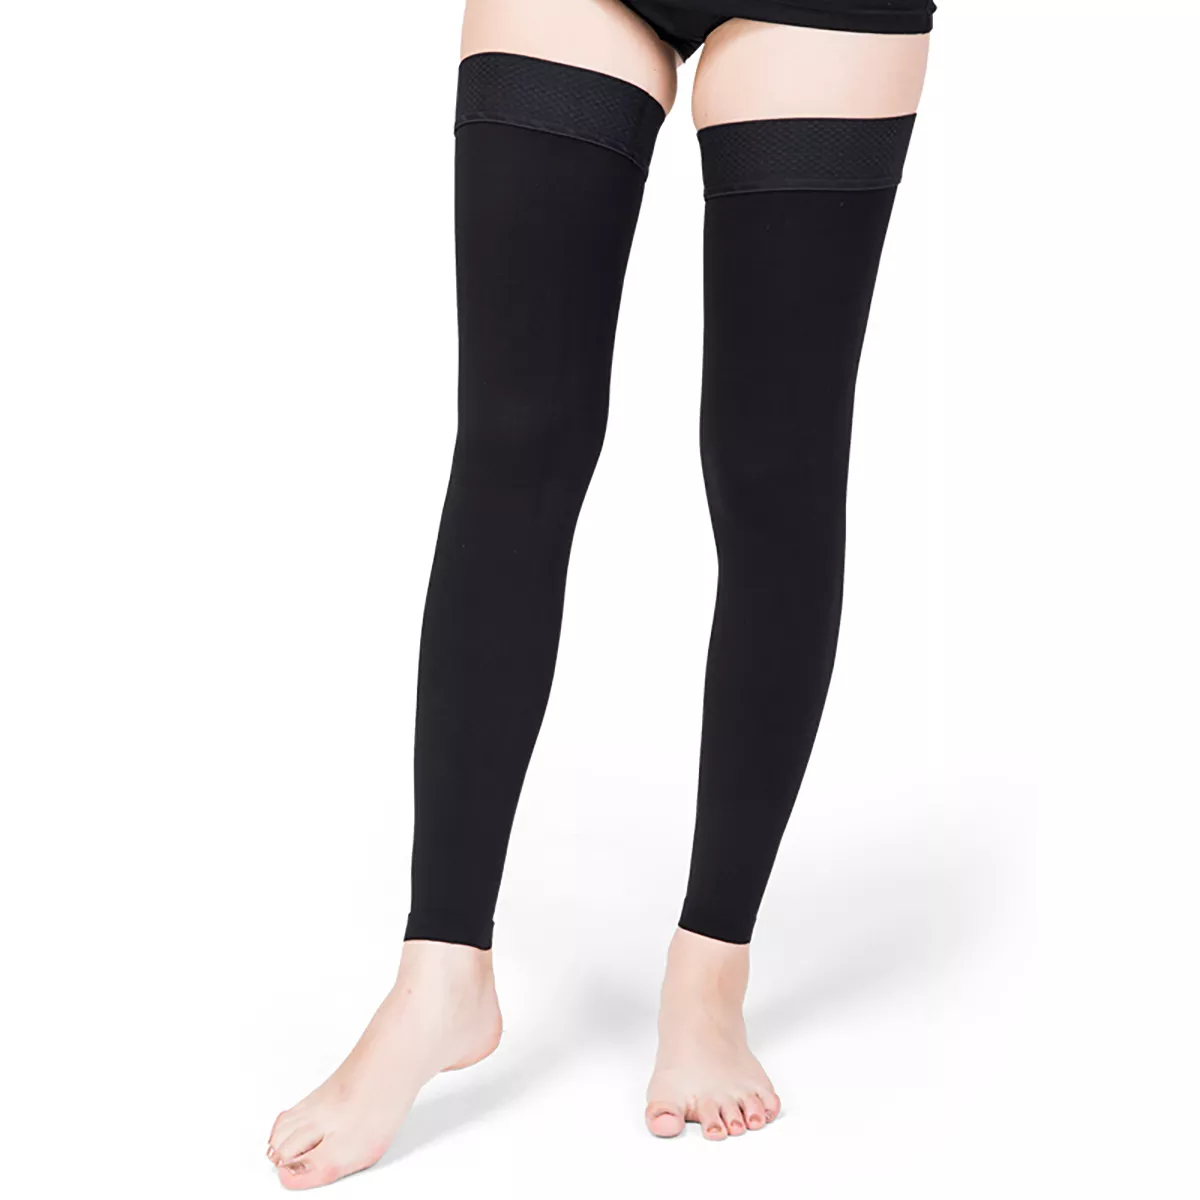 Graduated Hosiery Medical Compression Pantyhose - China Labeling Compression  Stockings and Unisex Compression Stockings price